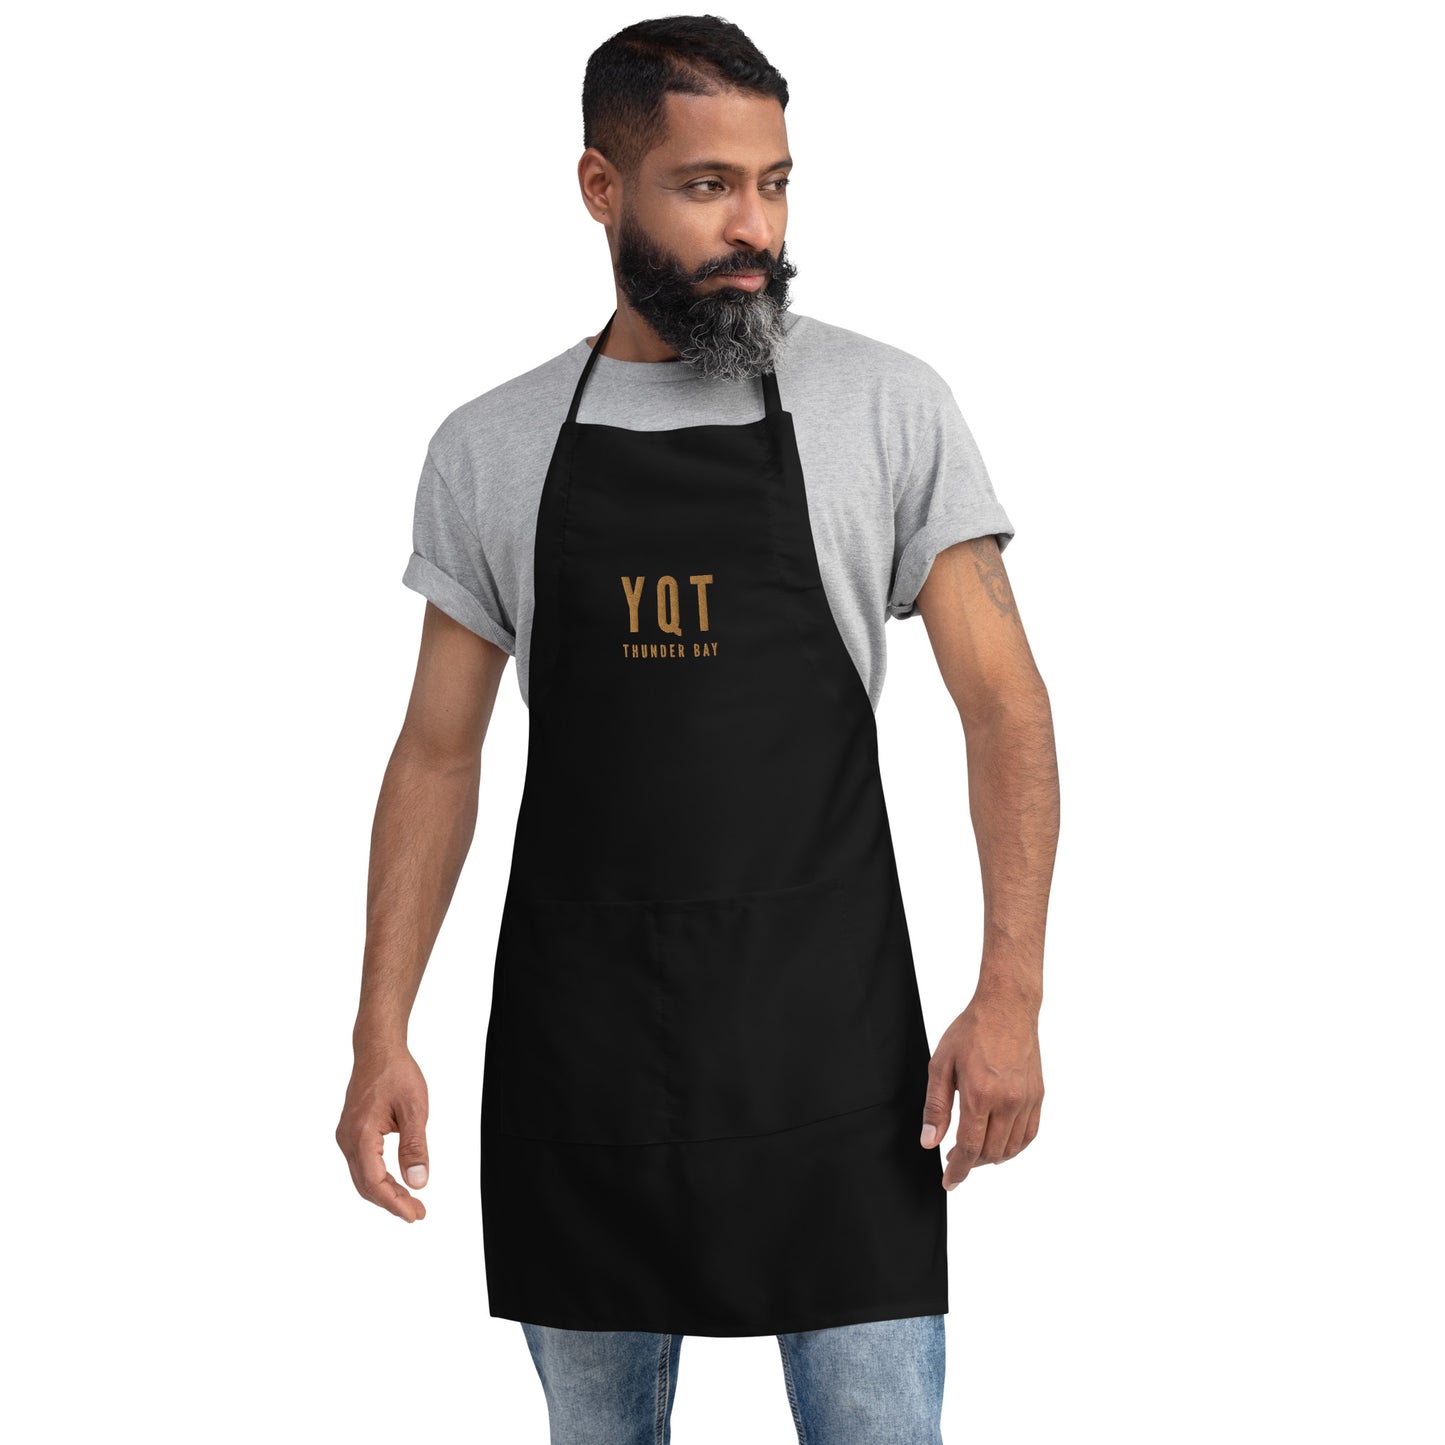 City Embroidered Apron - Old Gold • YQT Thunder Bay • YHM Designs - Image 05